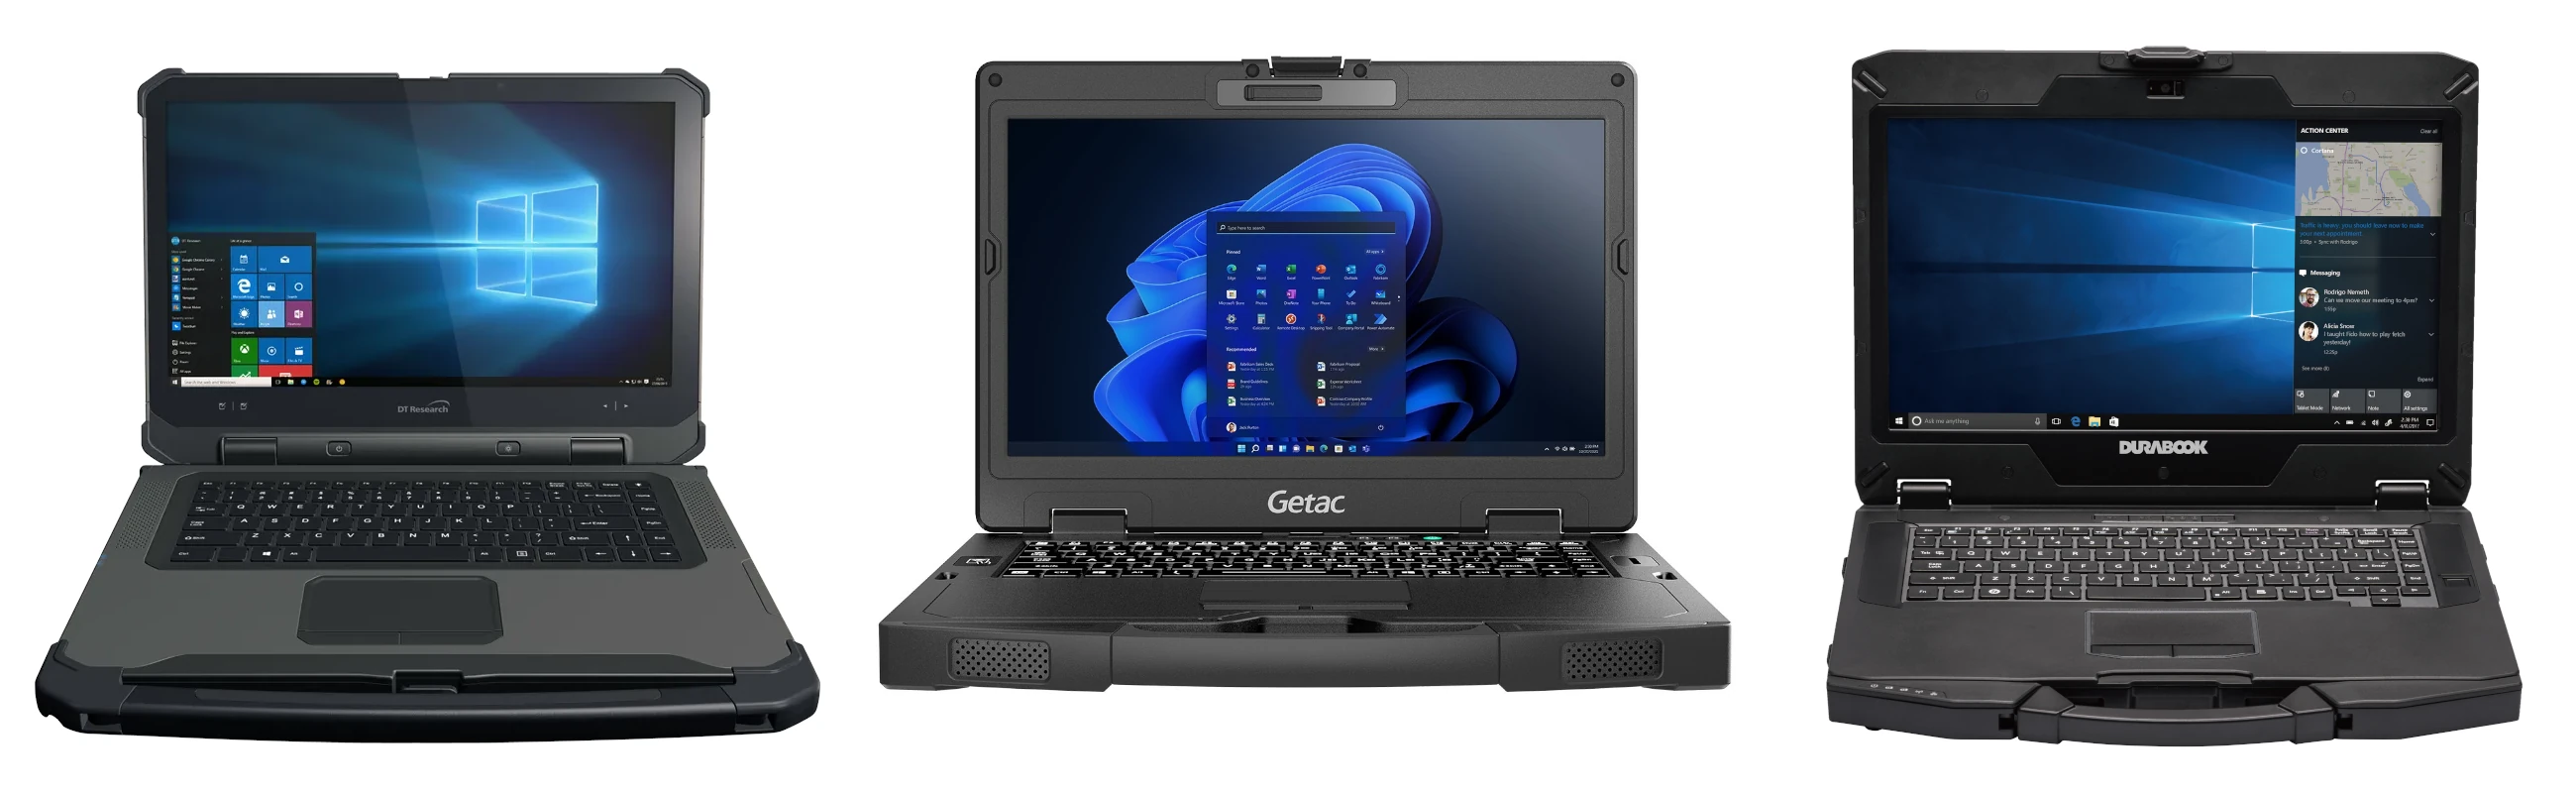 DT research, Getac and Durabook laptops